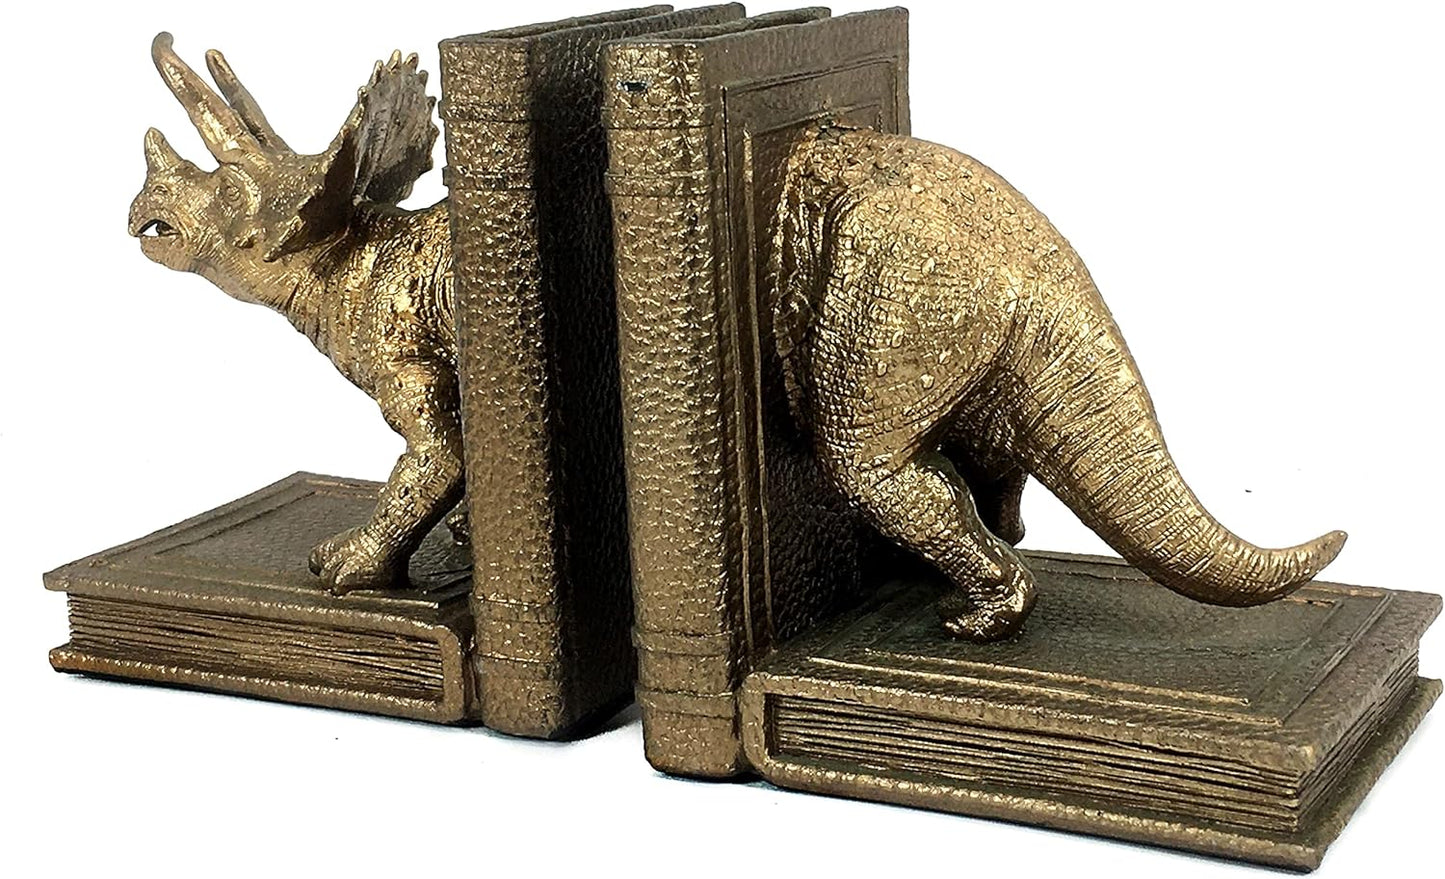 24223 Decorative Bookends Dinosaur Dragon Animal Art Statues Bookends Sculptures Figurine Heavy Nonskid Stoppers Bookshelf Holder Shelves Rack Dividers Library Office Home Decor Gold Vintage